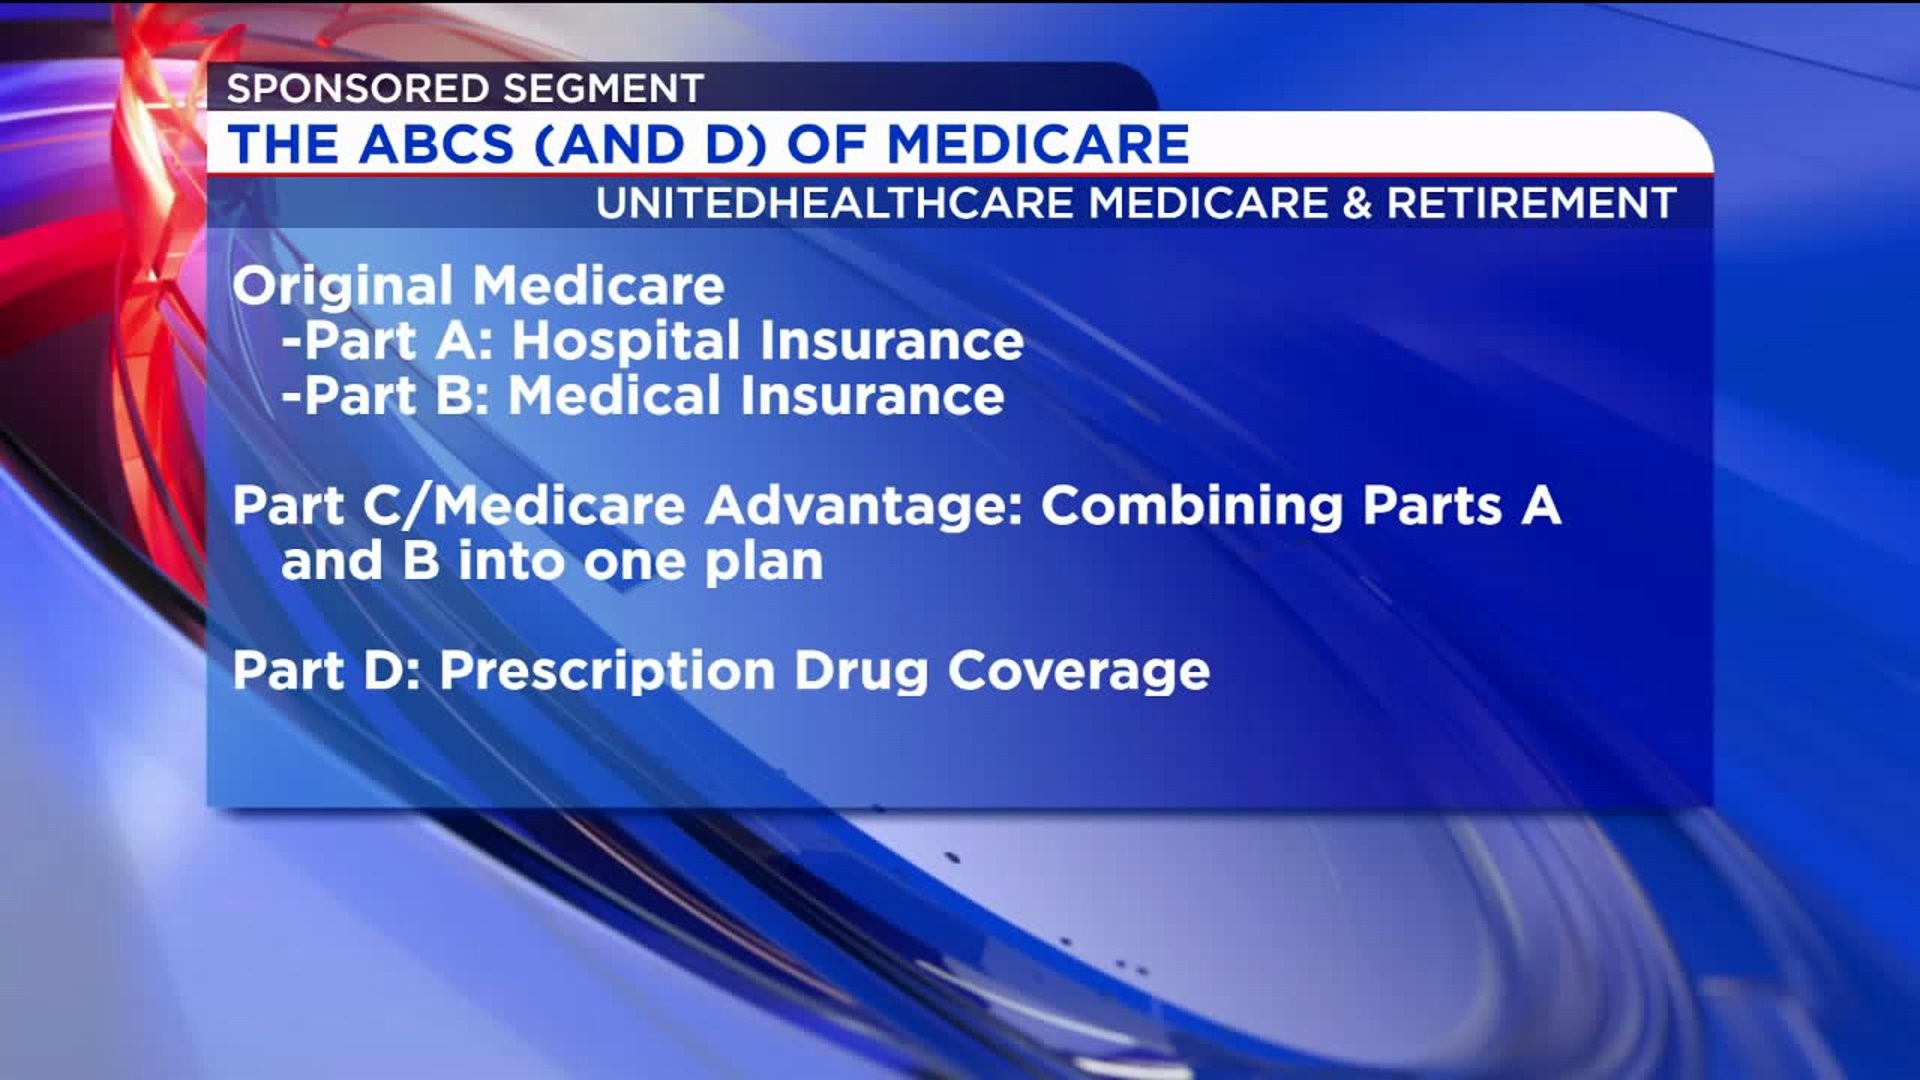 UnitedHealthcare Medicare & Retirement Interview with Jake Roberts